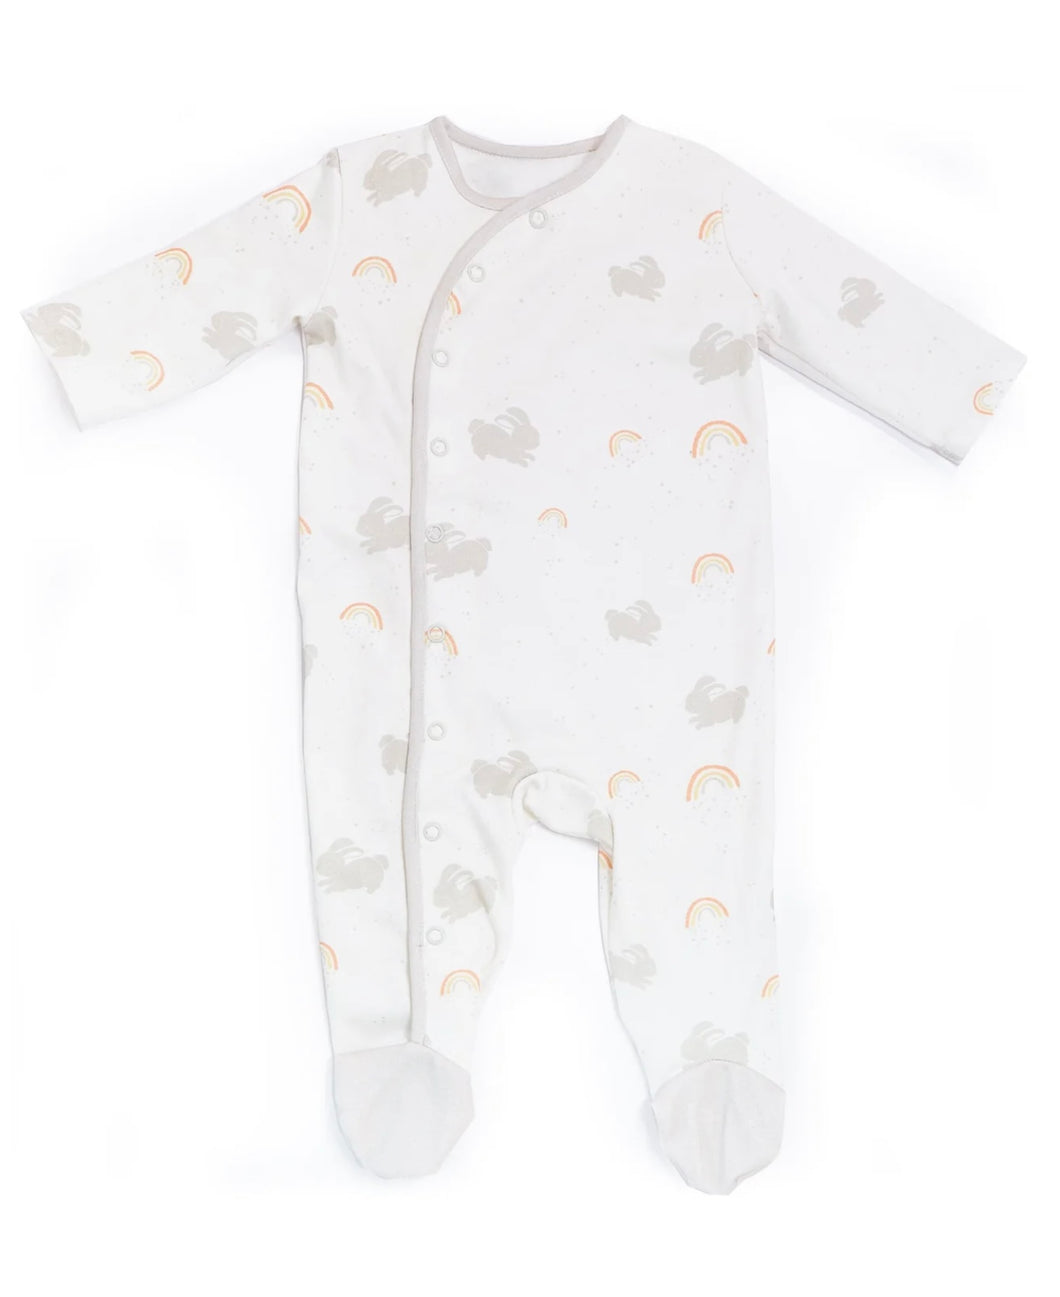 Bunnies by the Bay Little Sunshine Organic Romper